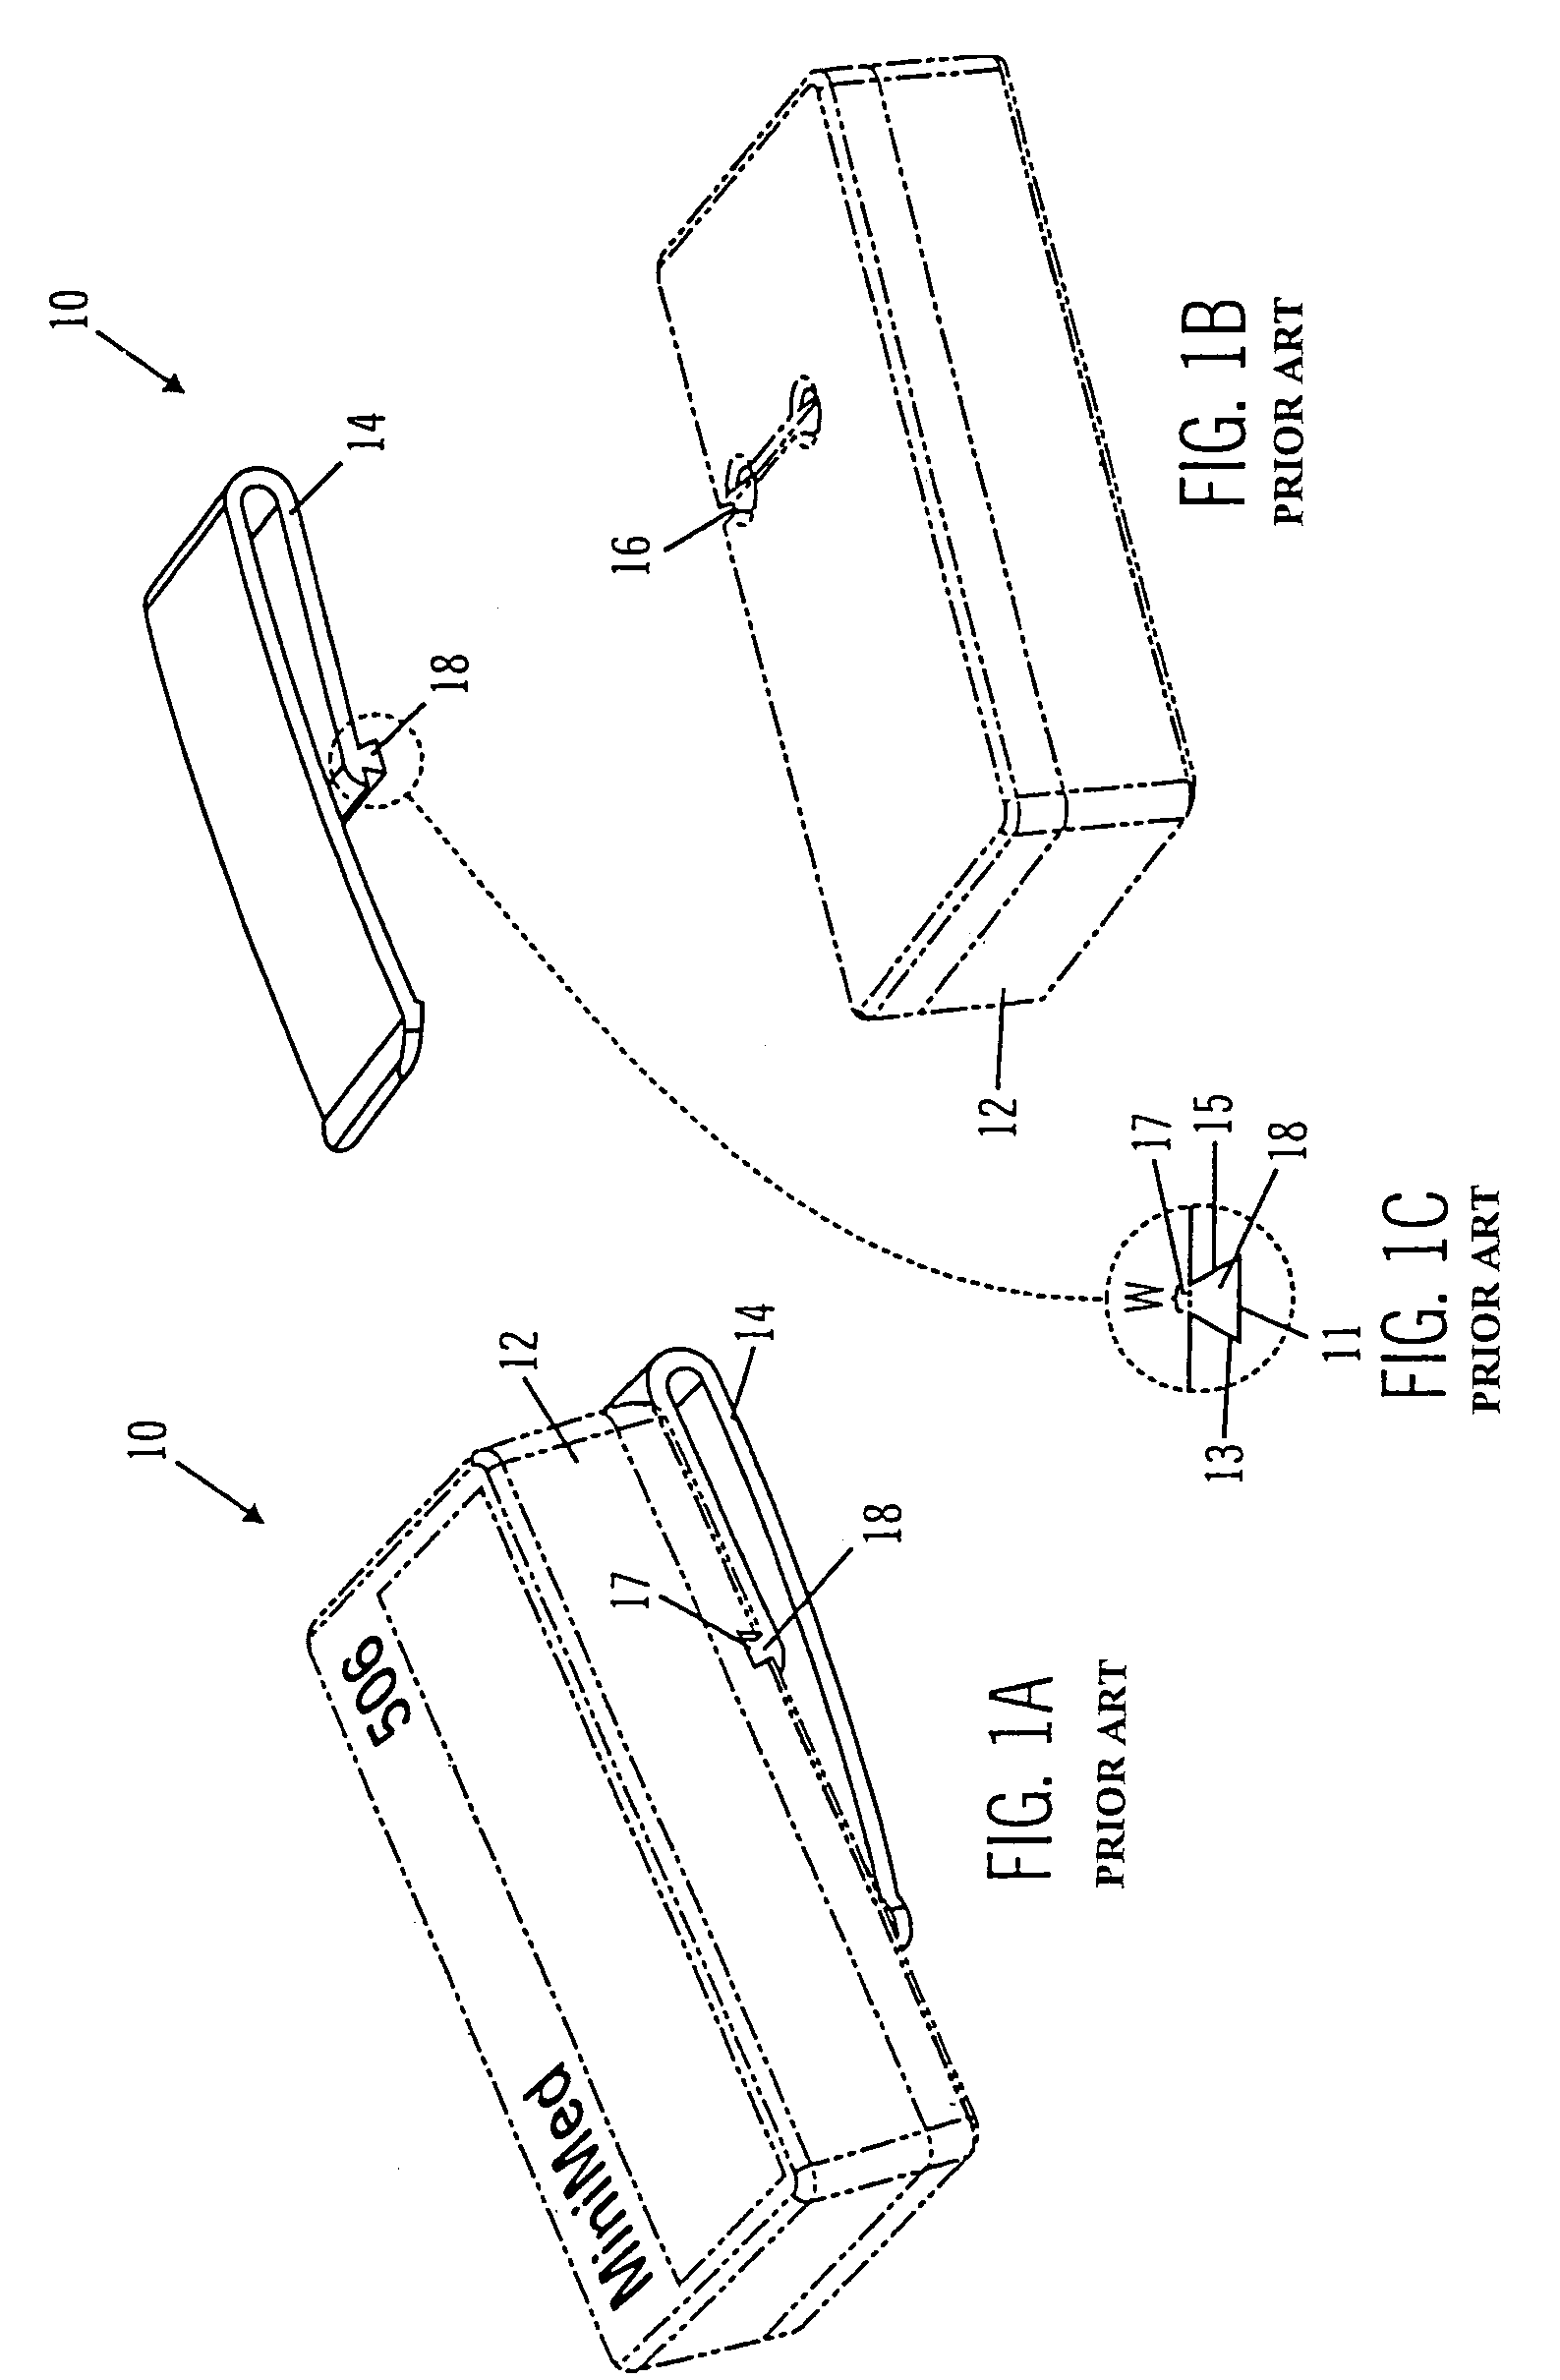 Low-profile mounting clip for personal device